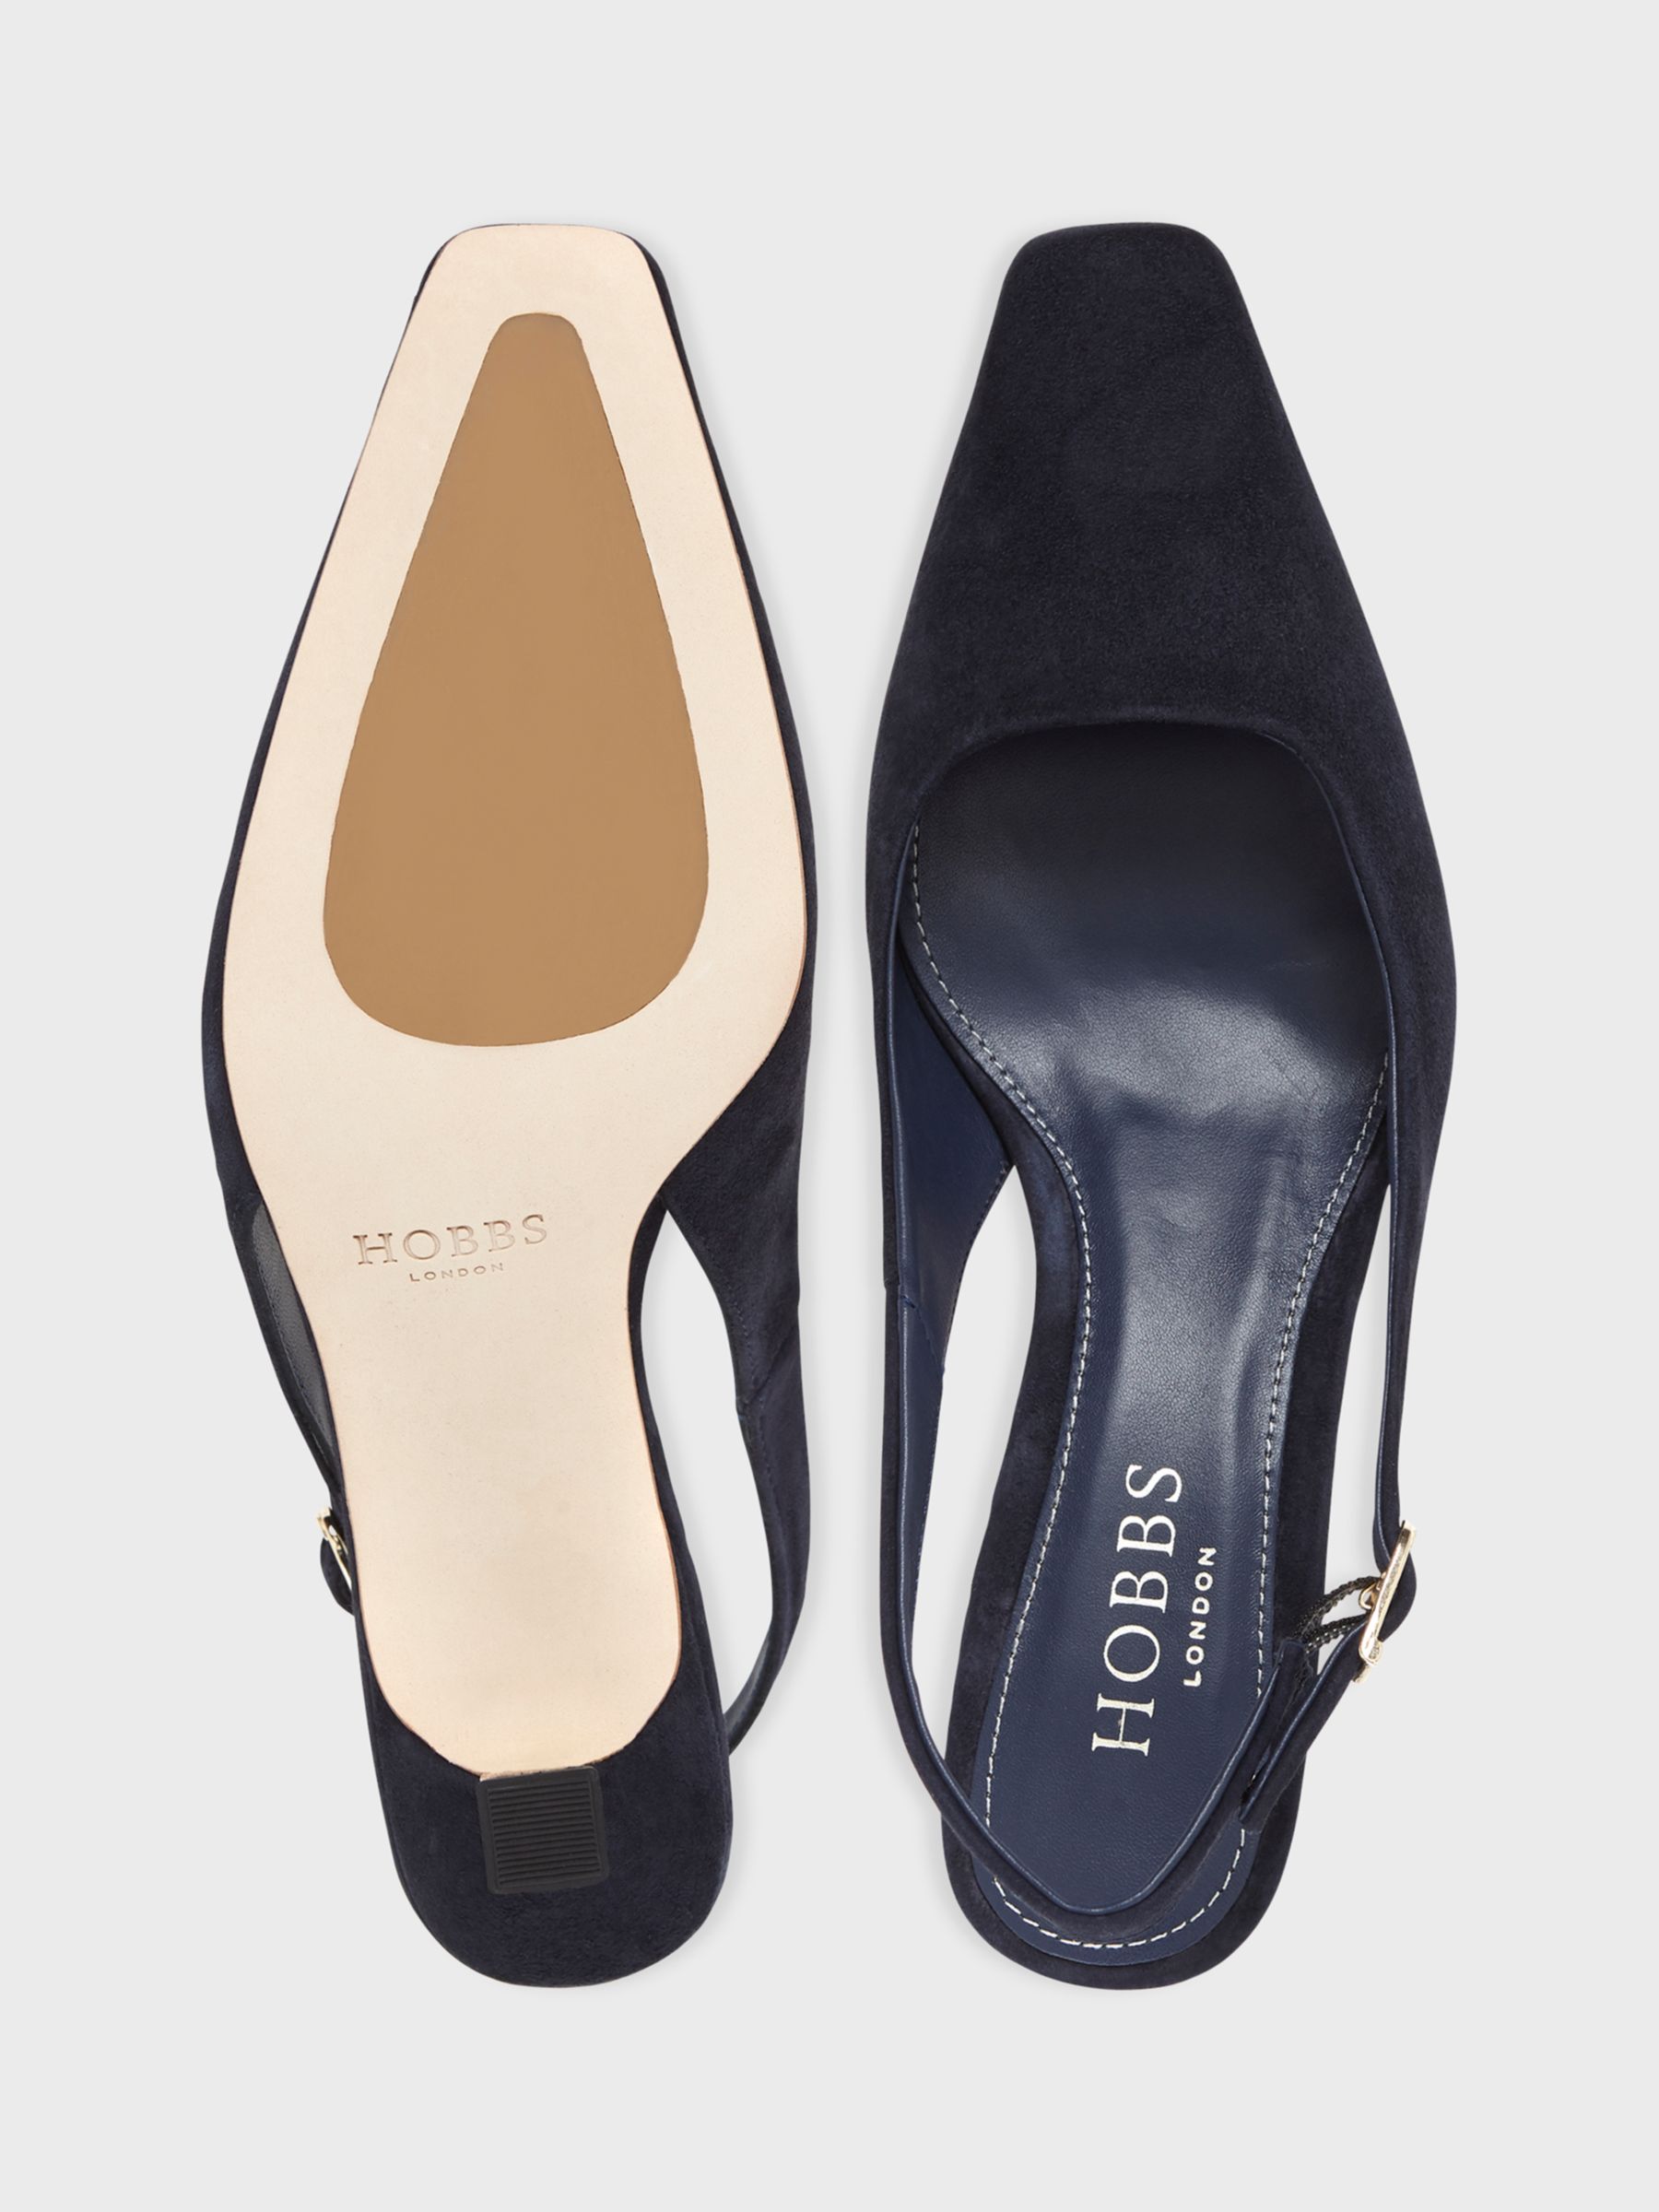 Hobbs Dita Slingback Suede Court Shoes, Navy at John Lewis & Partners